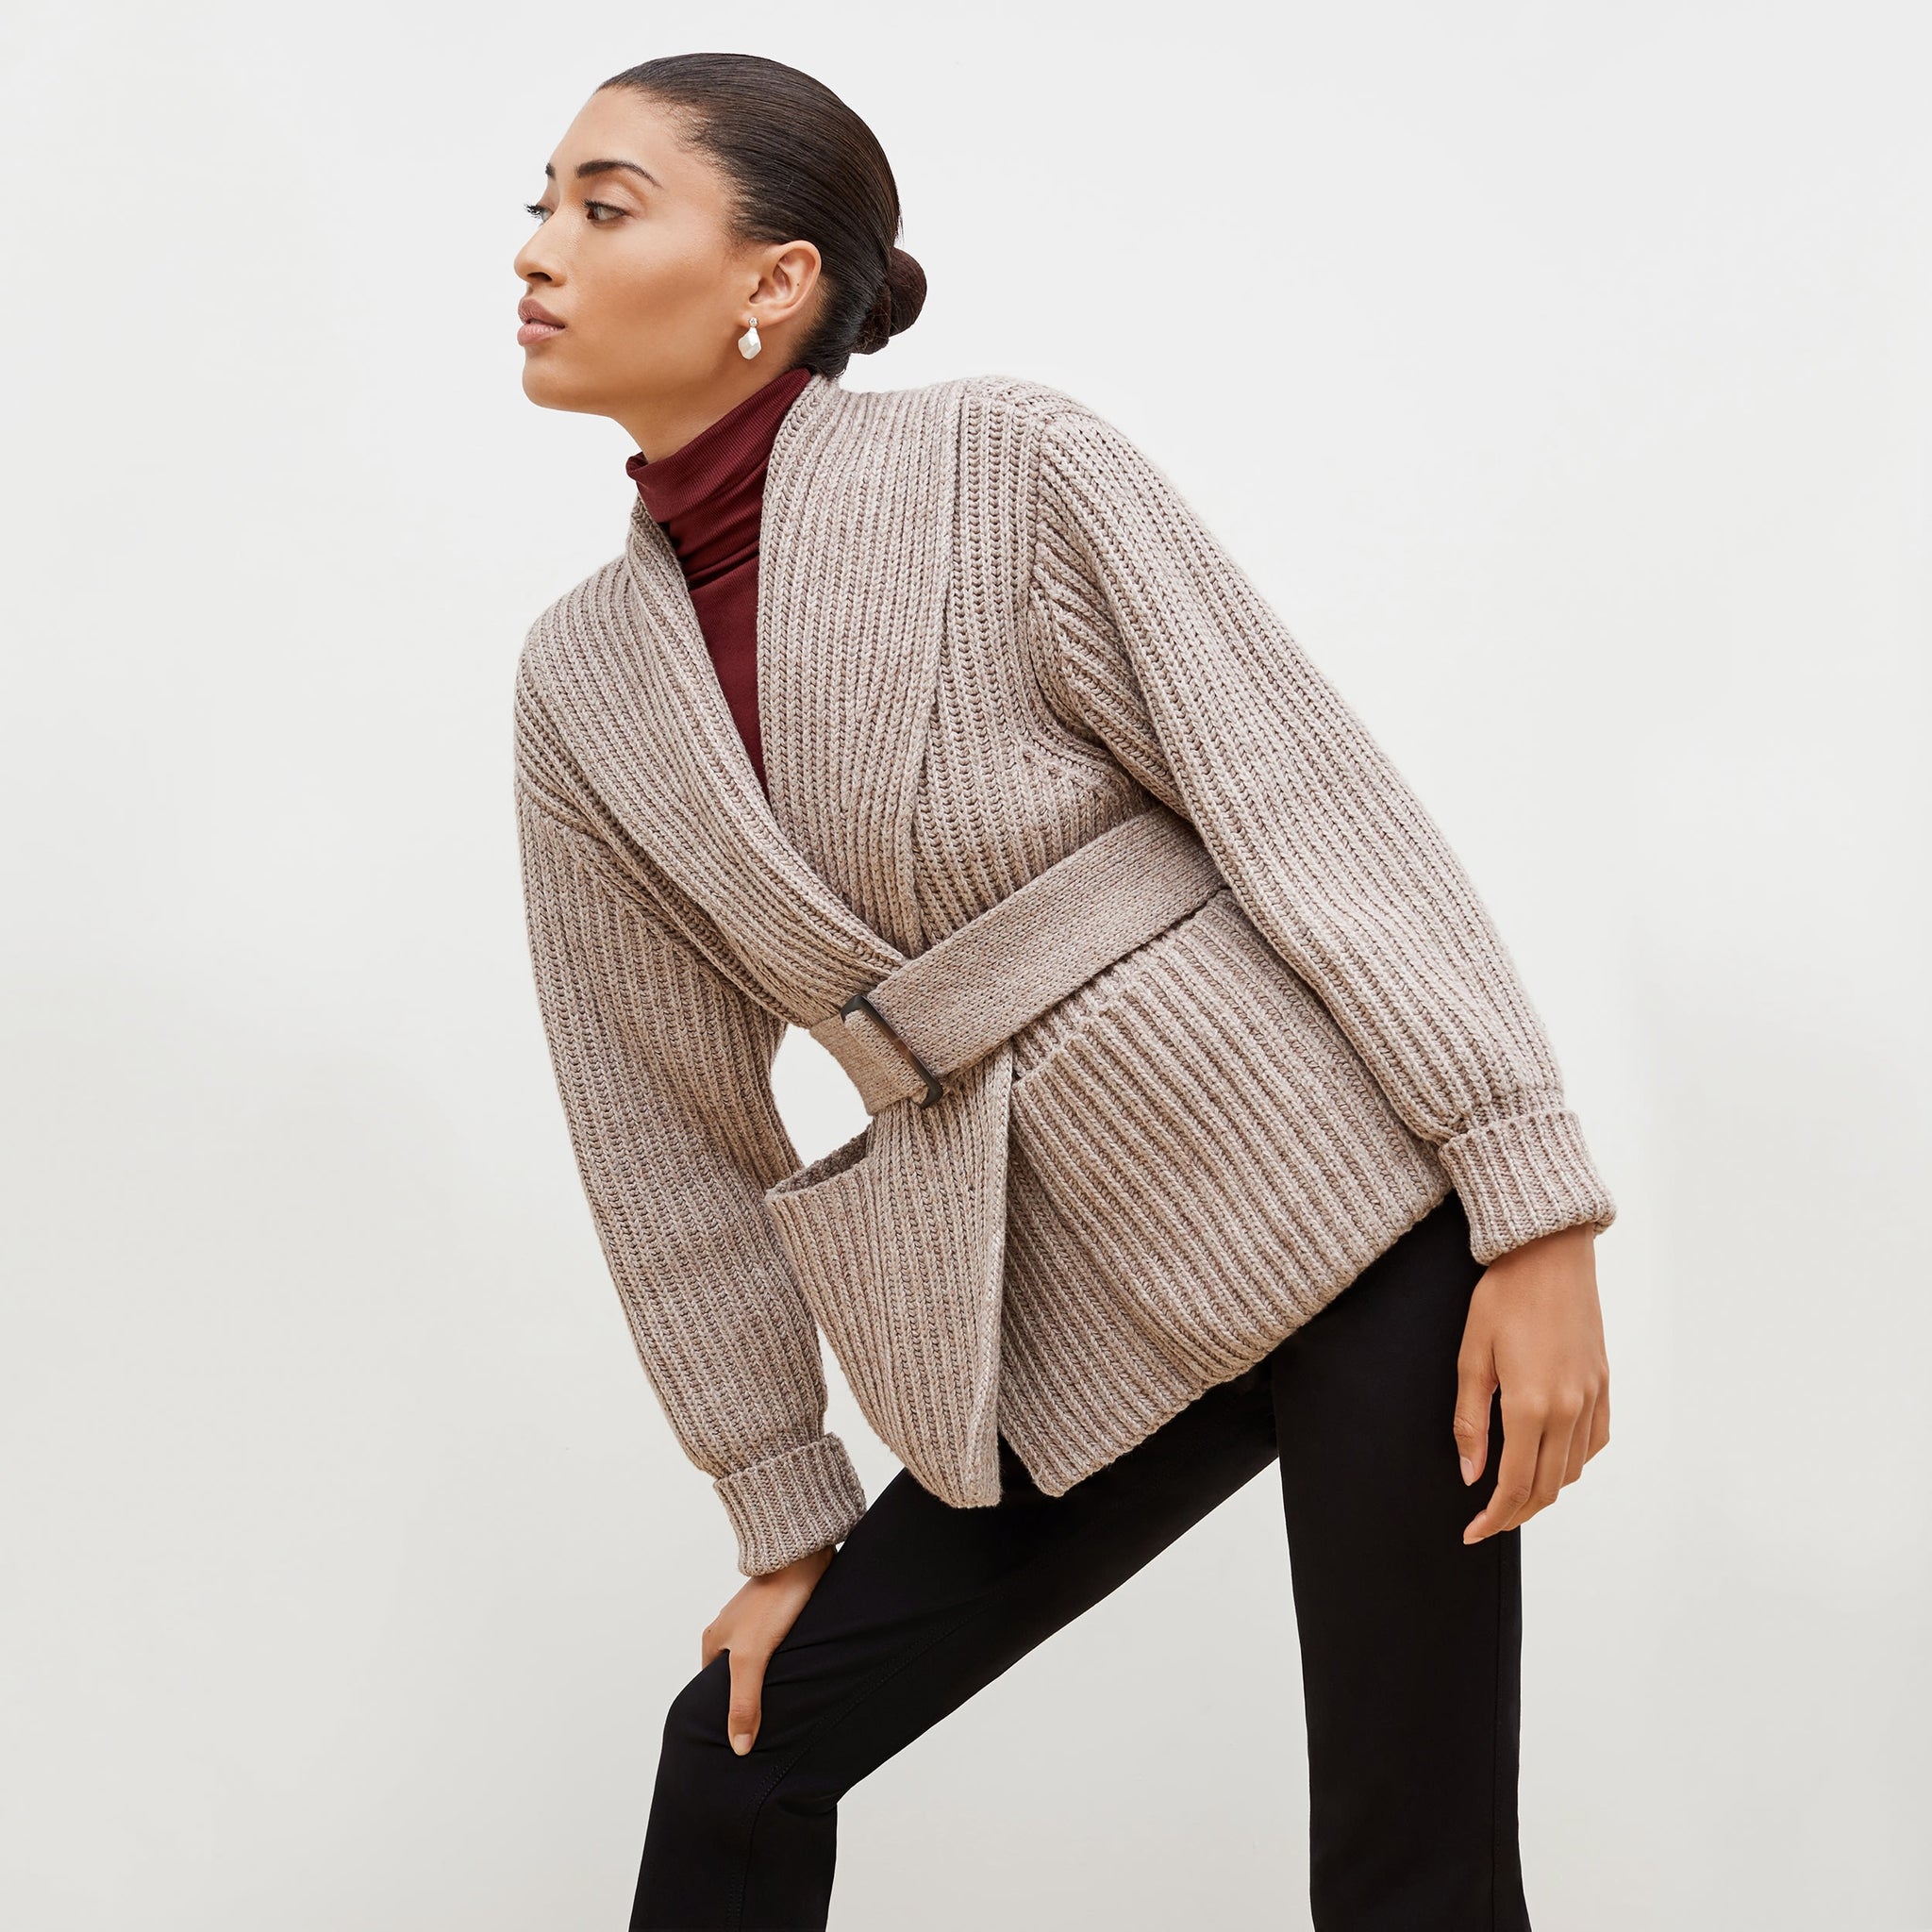 Front image of a woman standing wearing the Snyder Jacket—Lush Merino in Barley